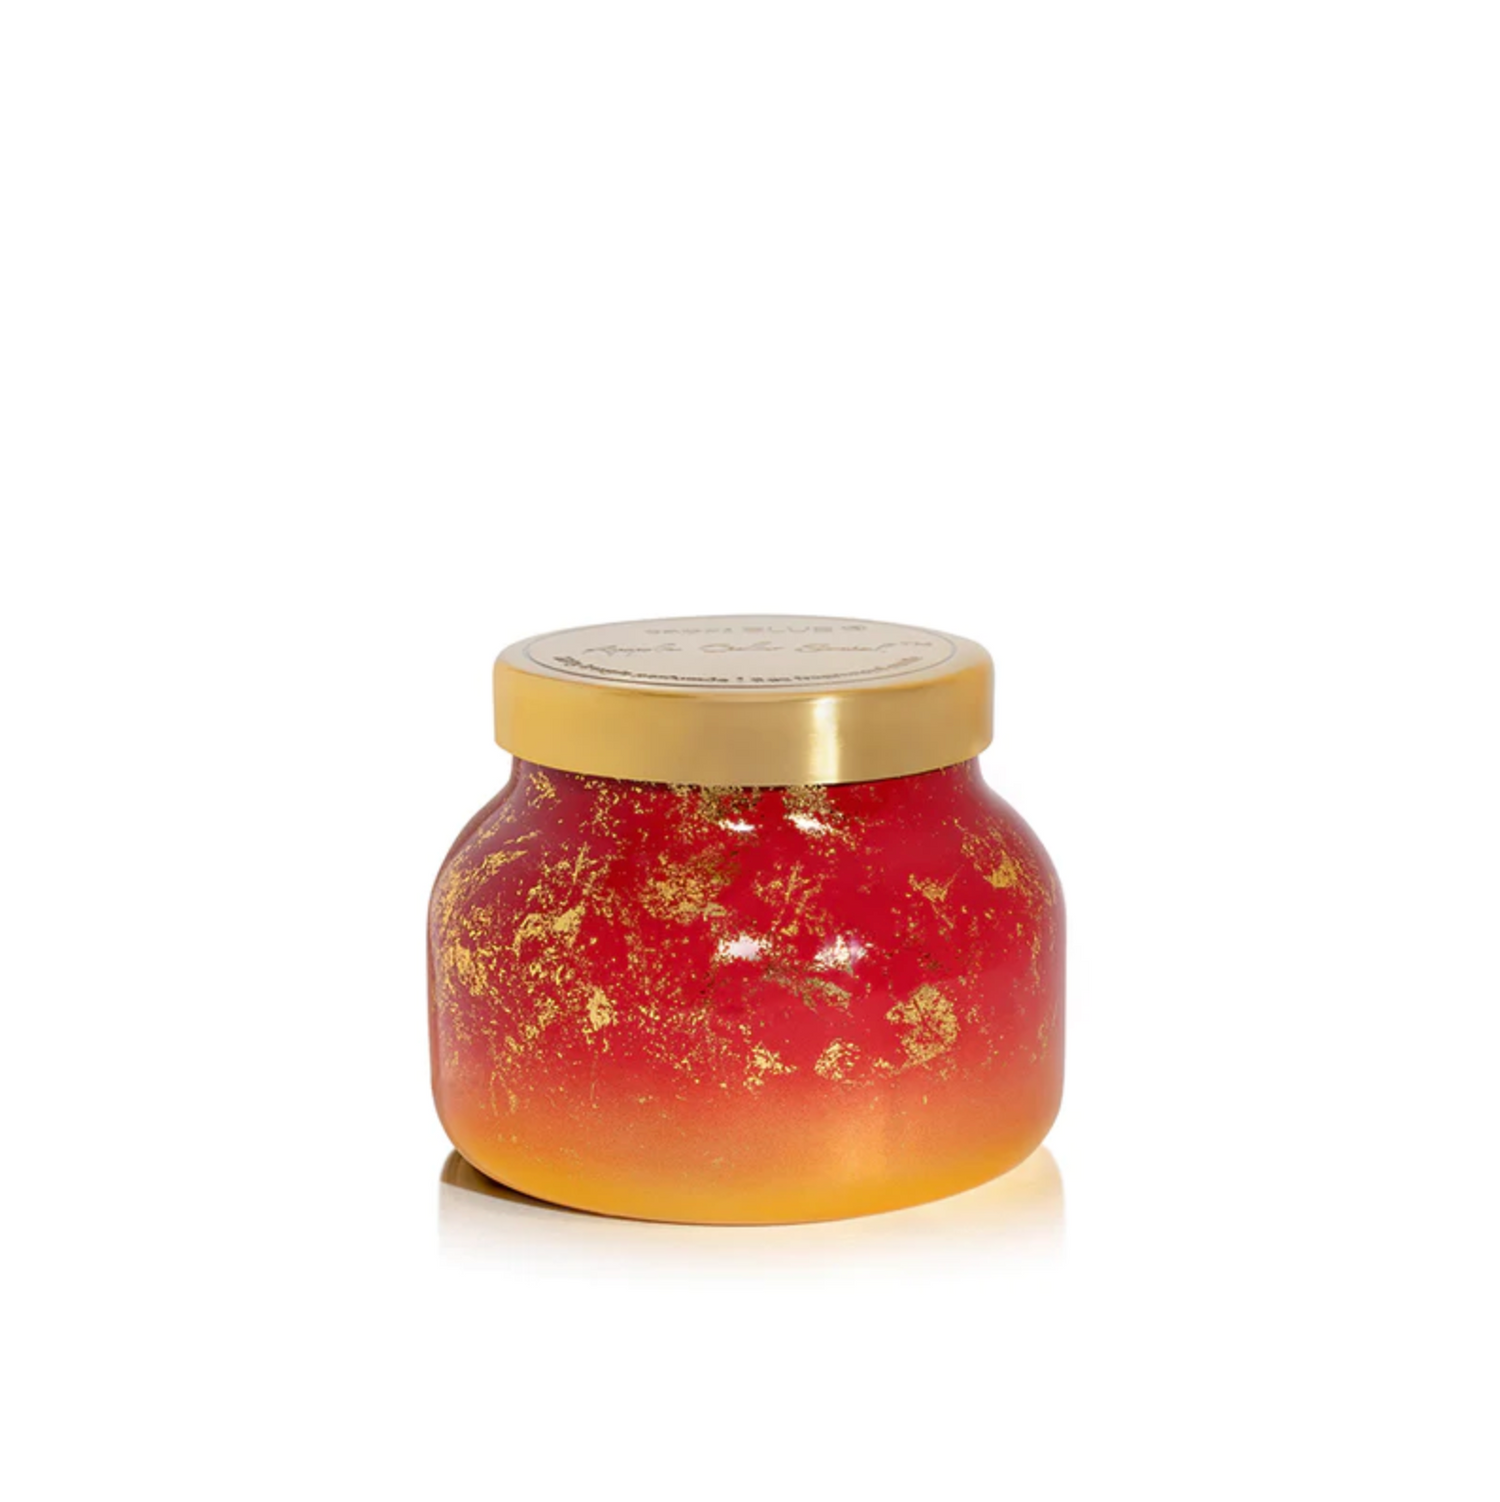 CB Candle Glim Jar 8oz Apple Cider Social Candles in  at Wrapsody